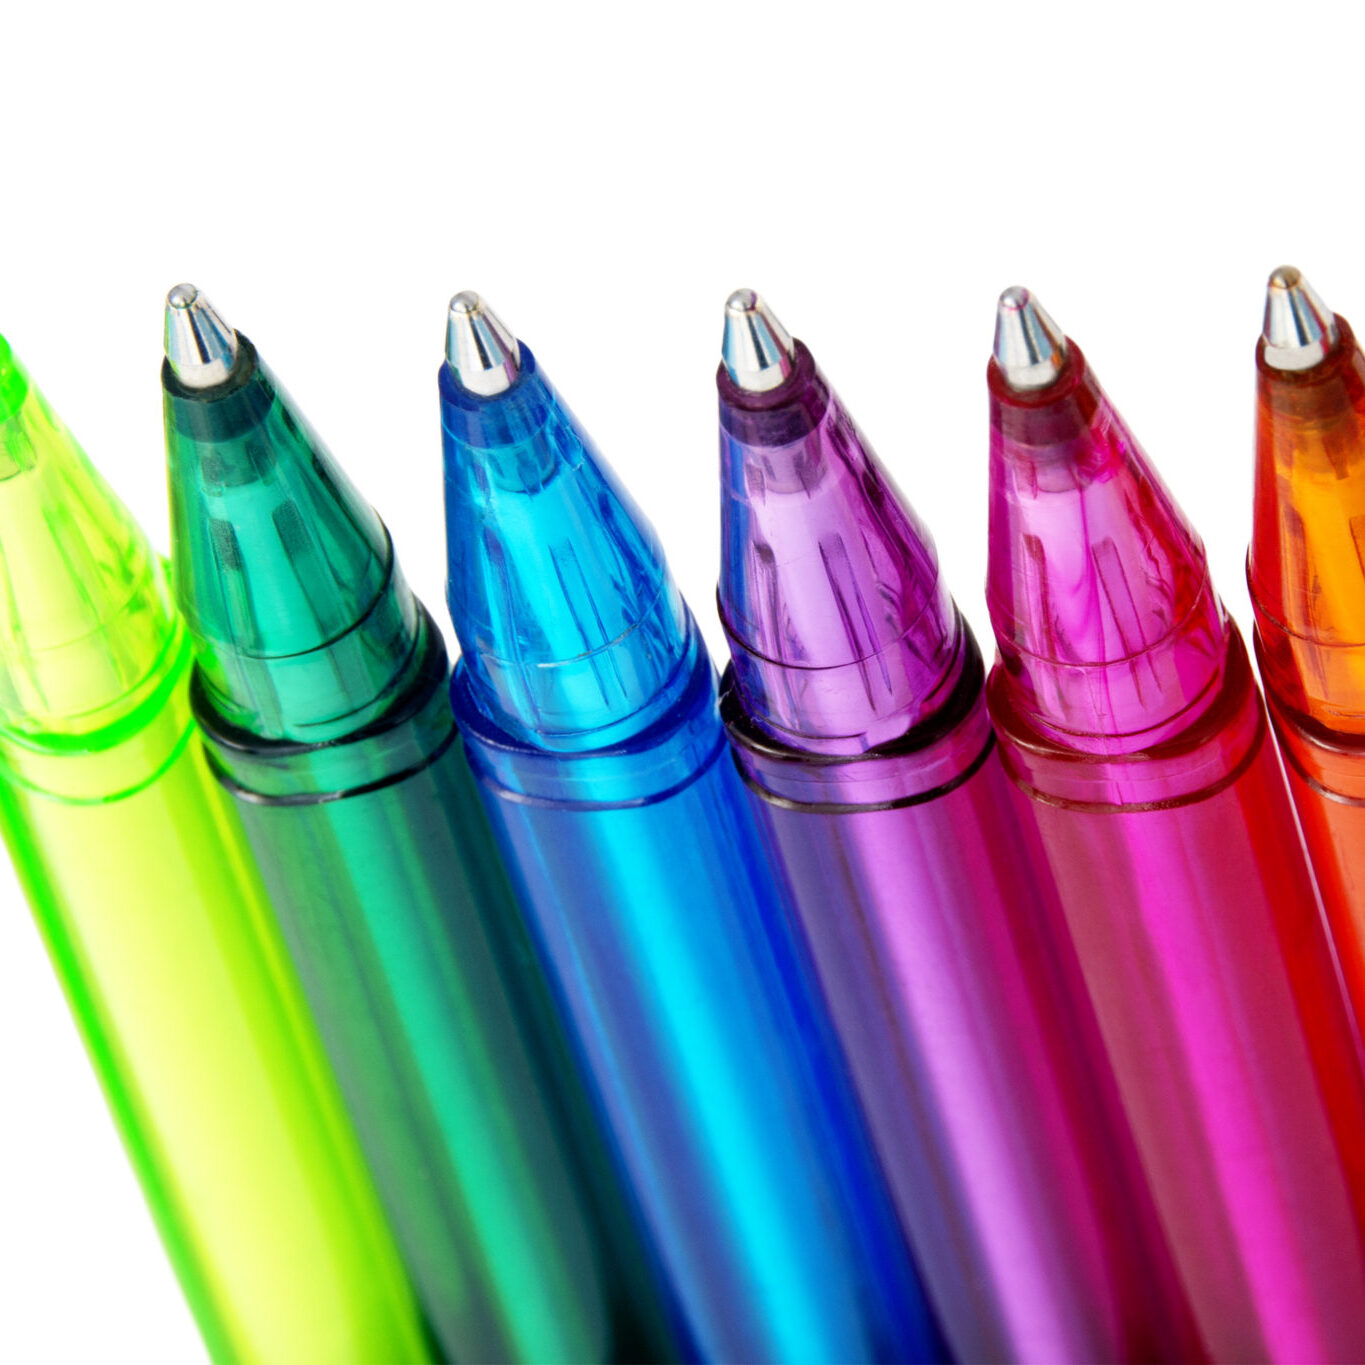 Various Colours of Ball Point Pens, Isolated on White Background